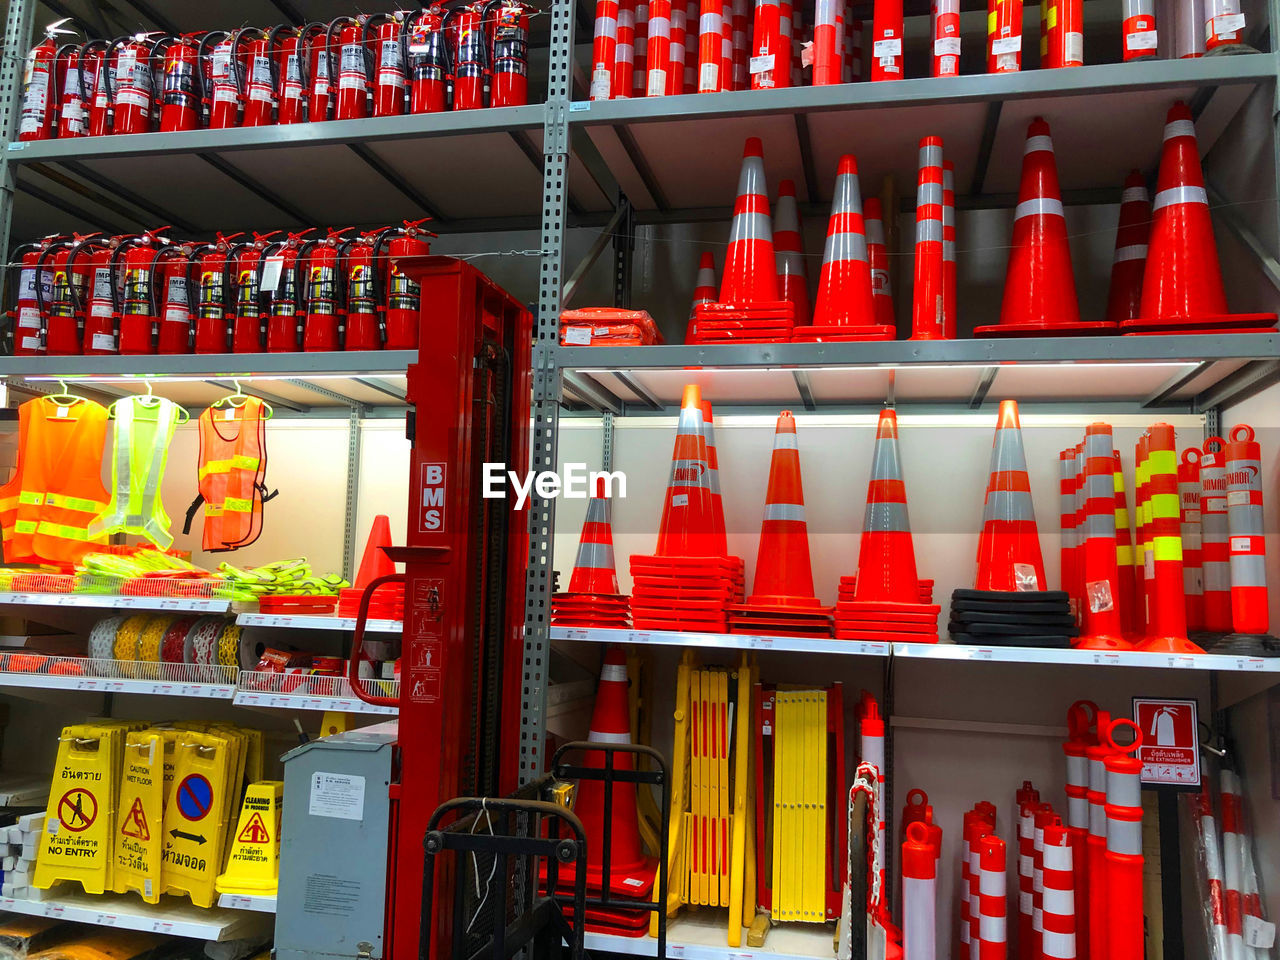 Traffic cones on shelves in store